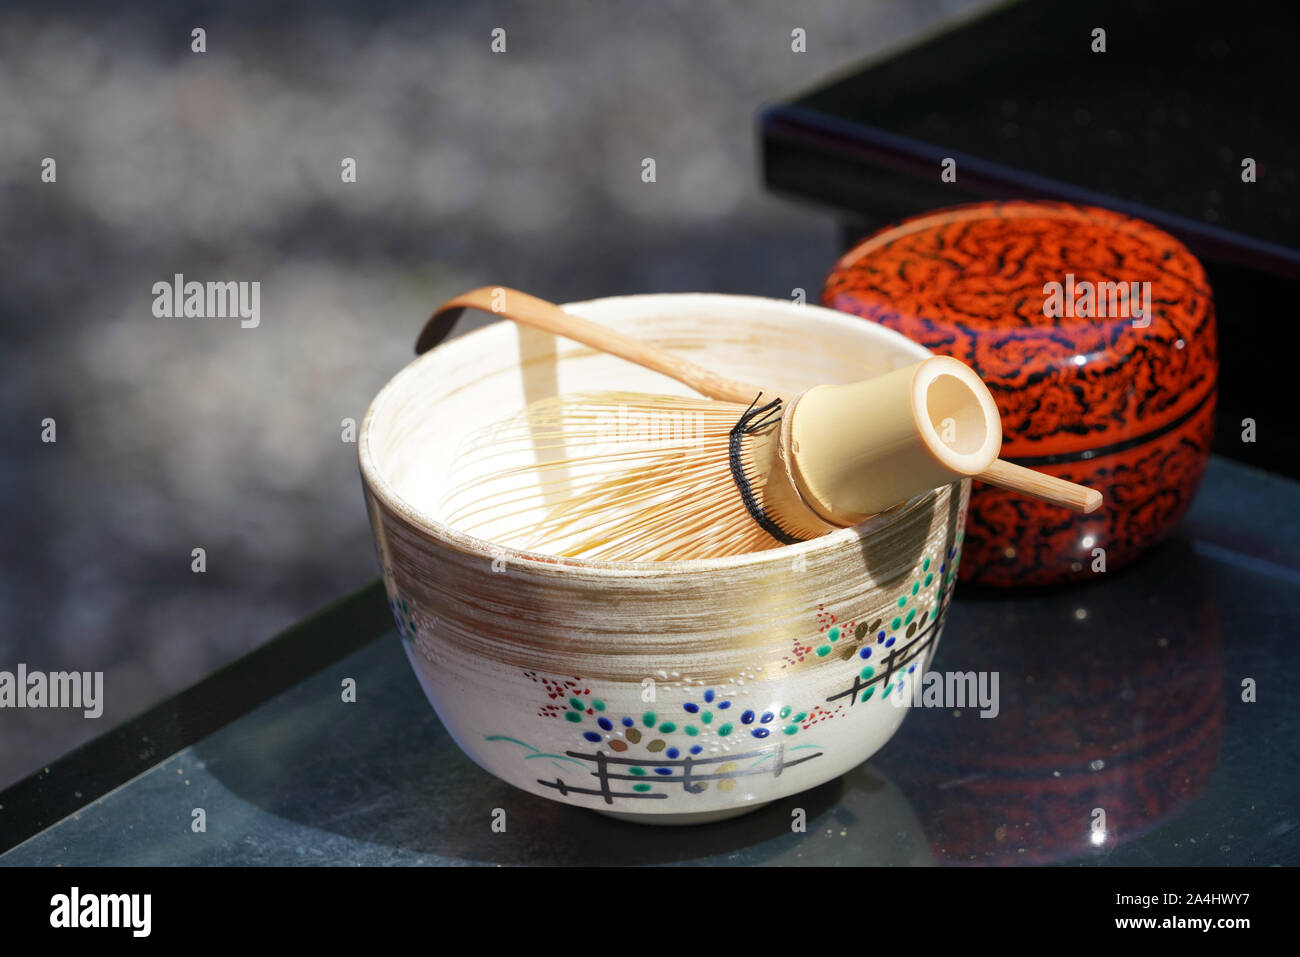 Tea bowl with tea whisk used in Japanese matcha green tea ceremony Stock Photo